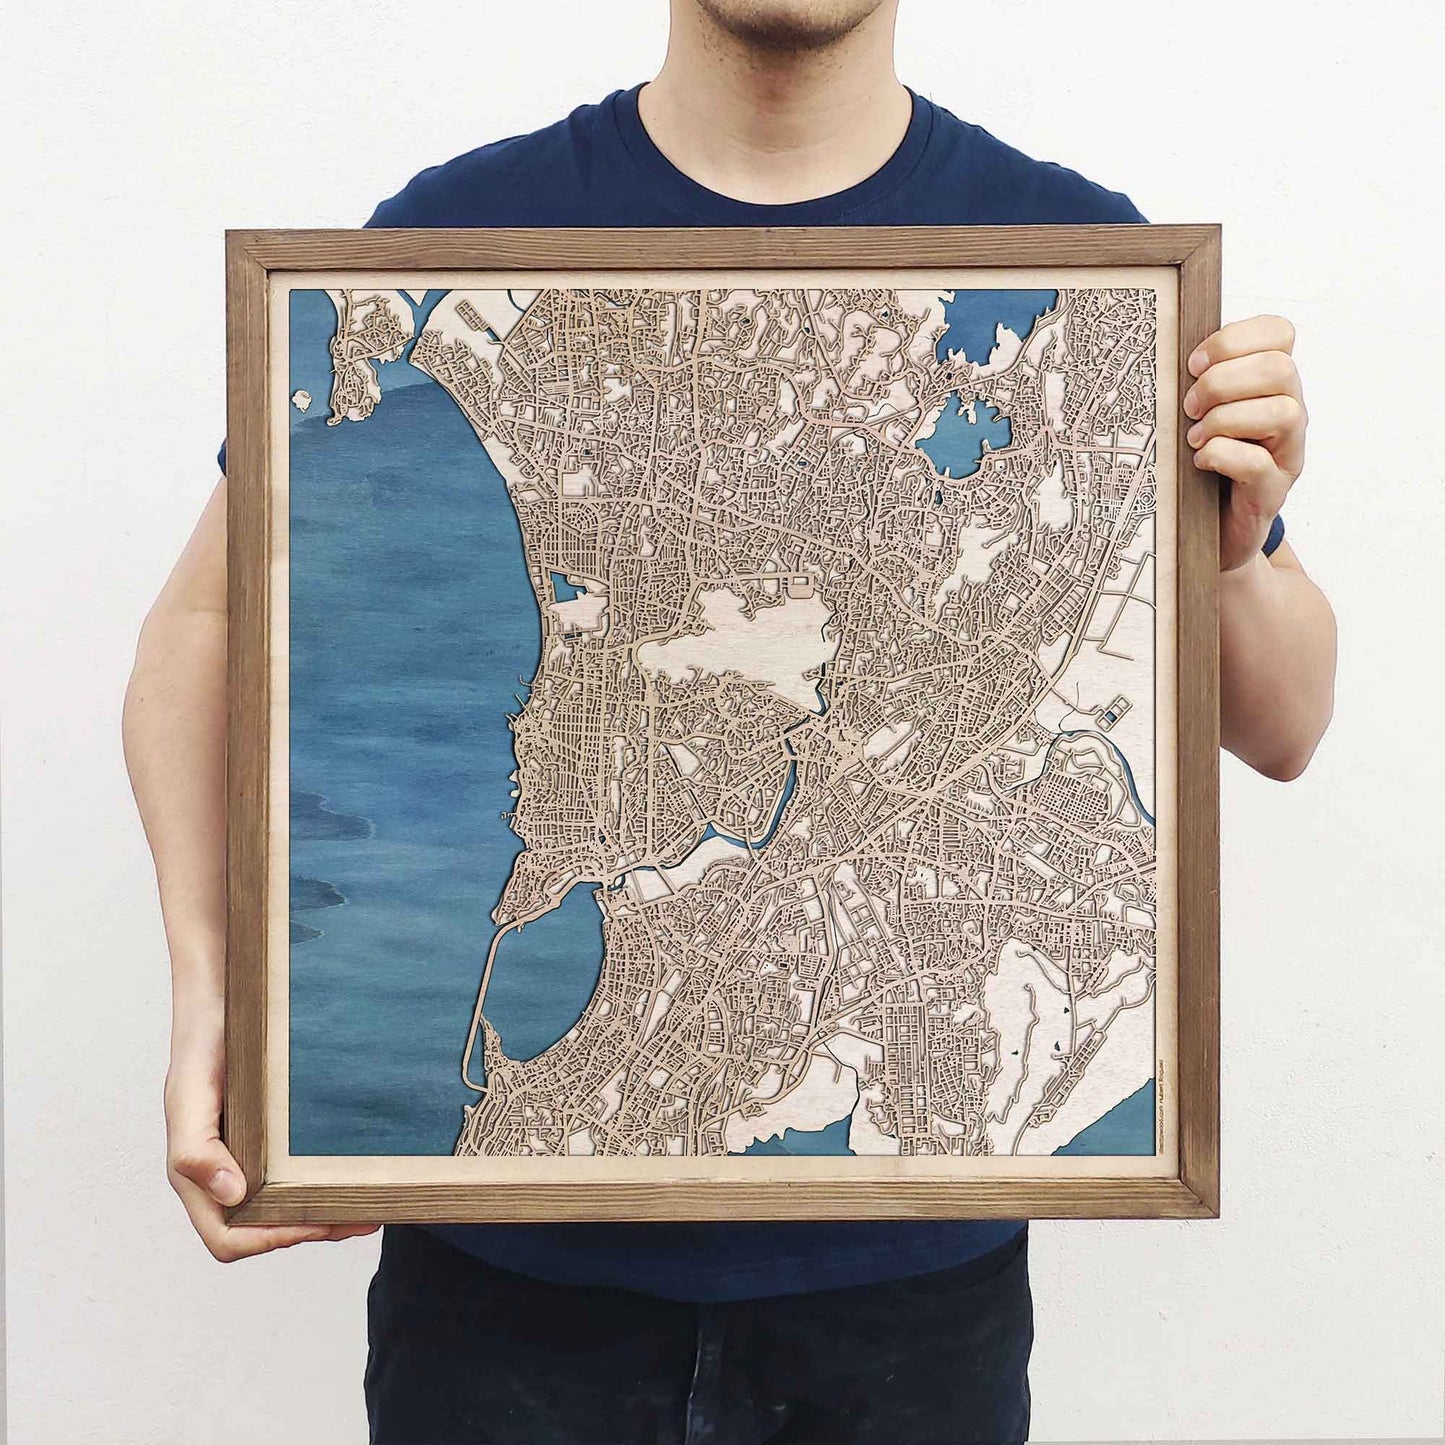 Mumbai Wooden Map by CityWood - Custom Wood Map Art - Unique Laser Cut Engraved - Anniversary Gift